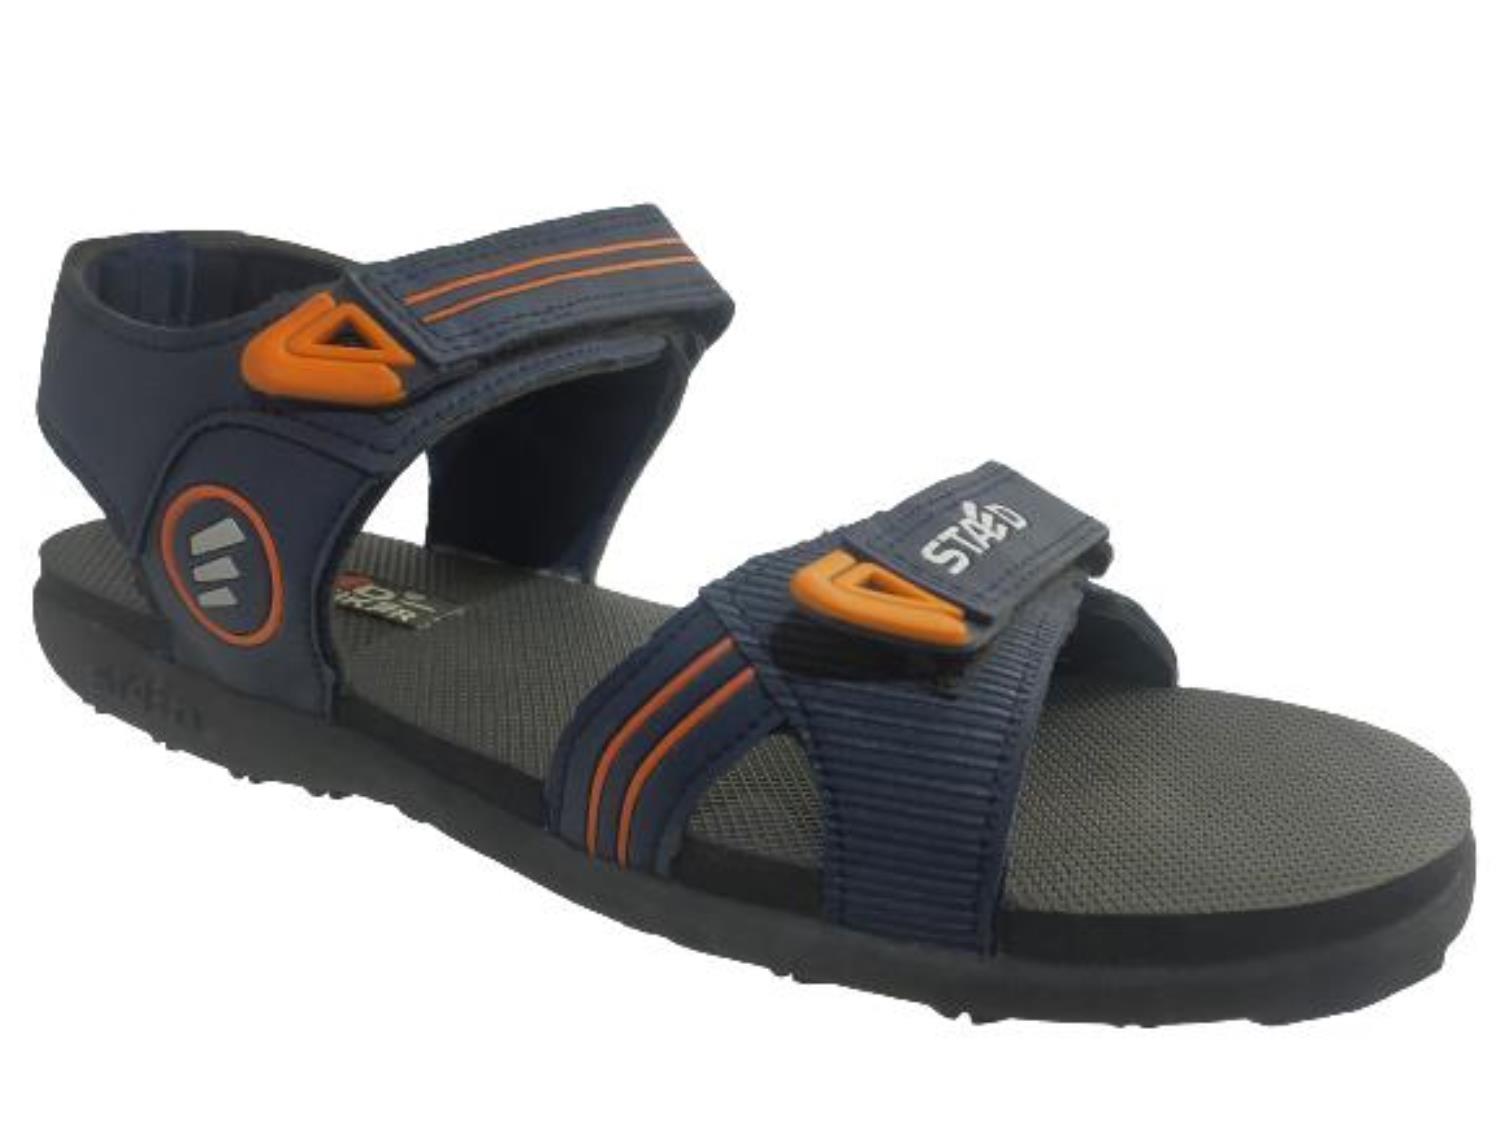 STAED SR 5003 NAVY MENS FLOATERS | Udaan - B2B Buying for Retailers